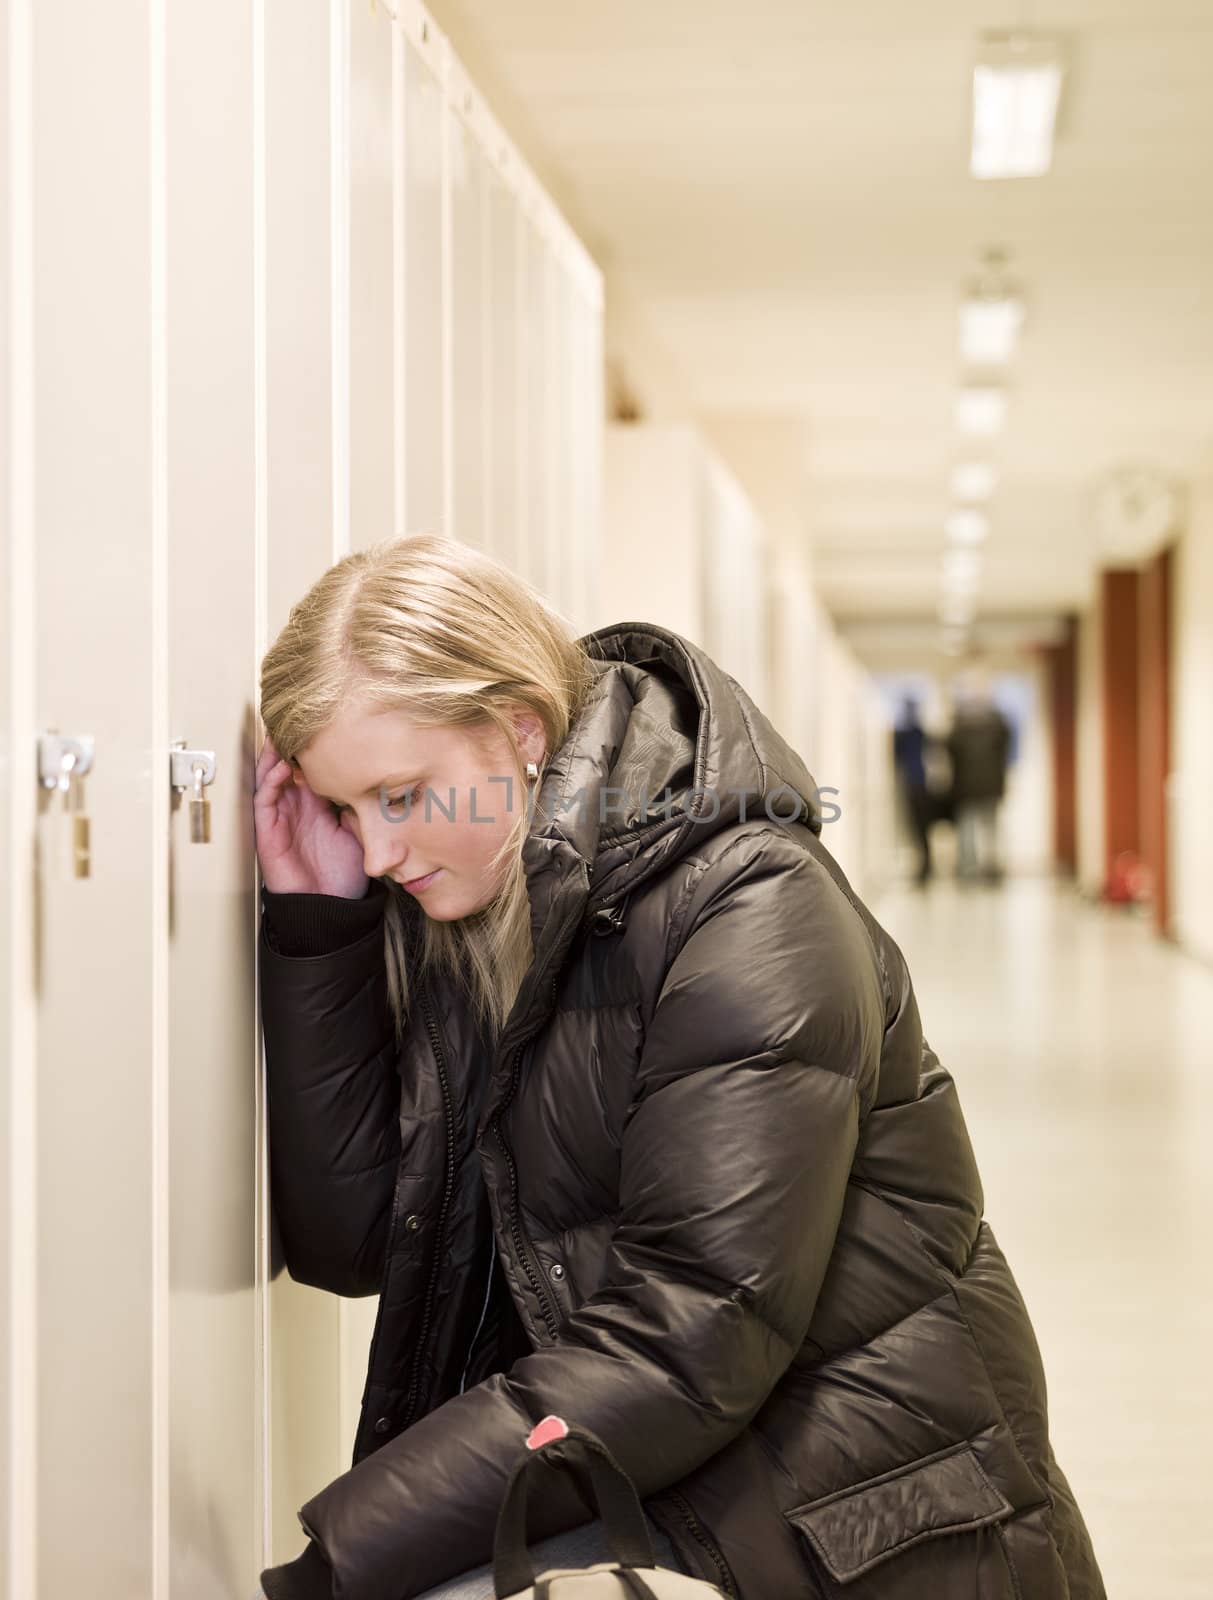 Depressed young woman by the lockers at school